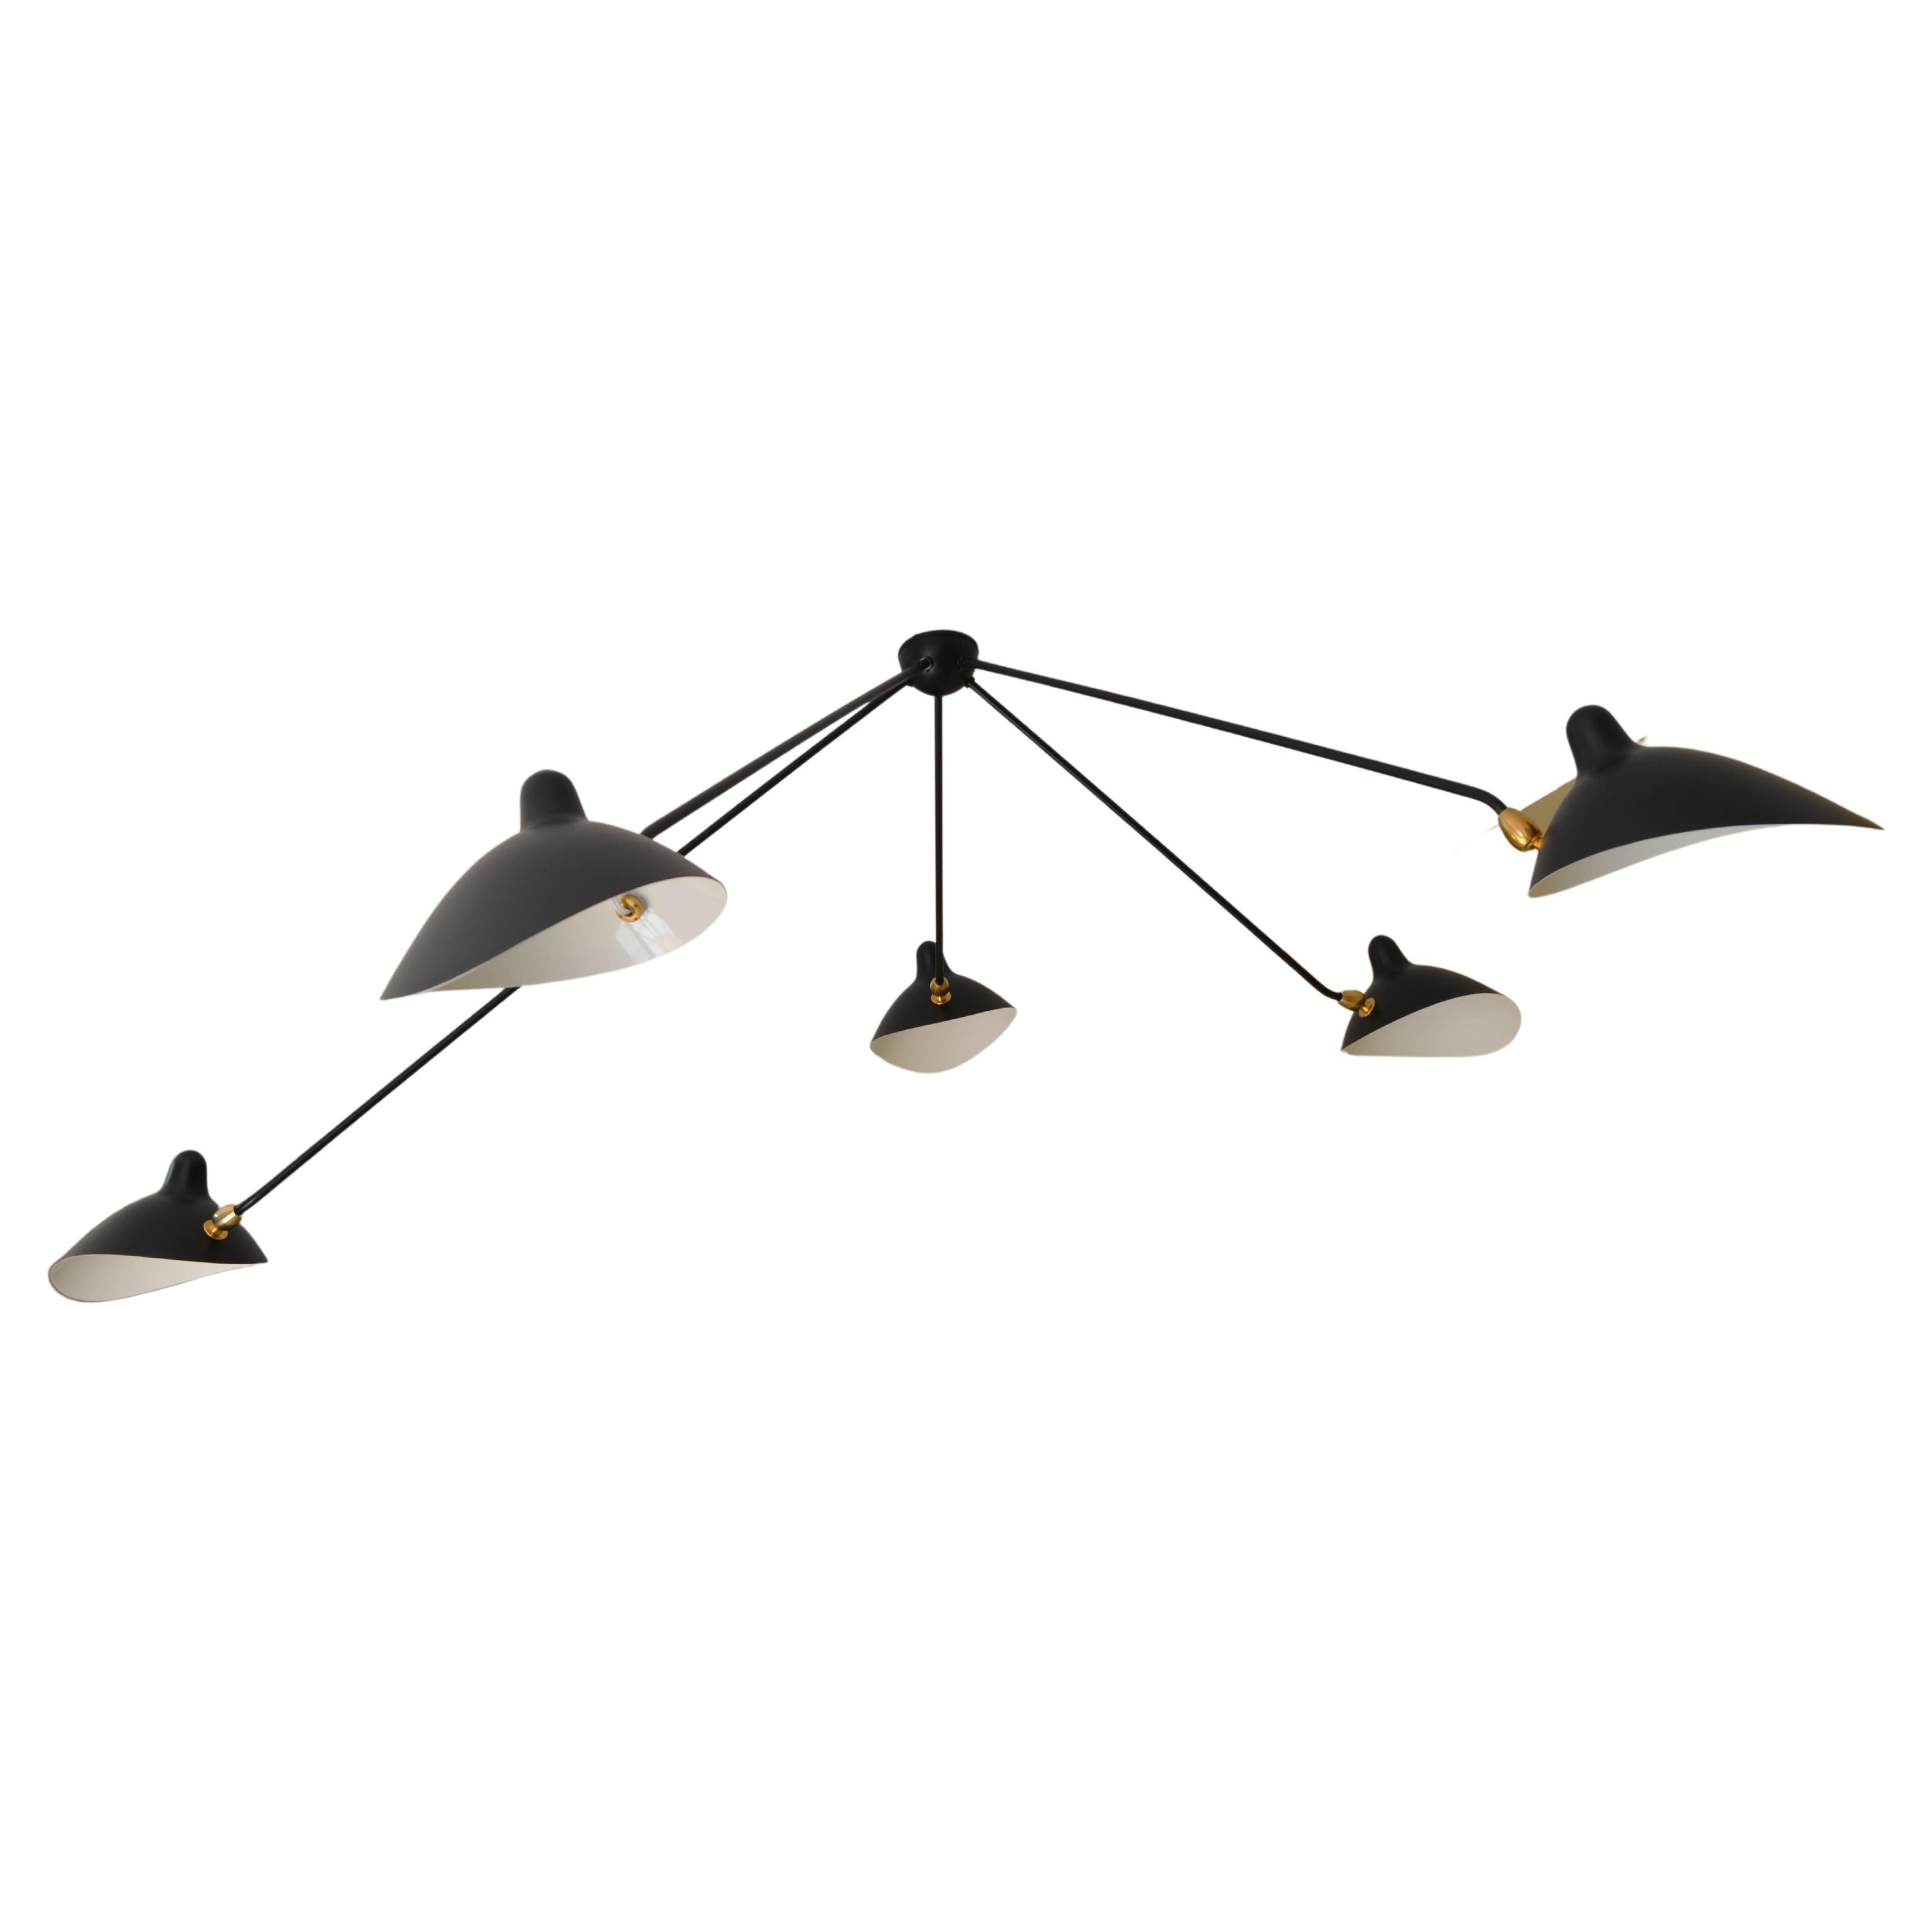 Serge Mouille - Black or White Spider Ceiling Lamp with 5 Arms - IN STOCK! For Sale